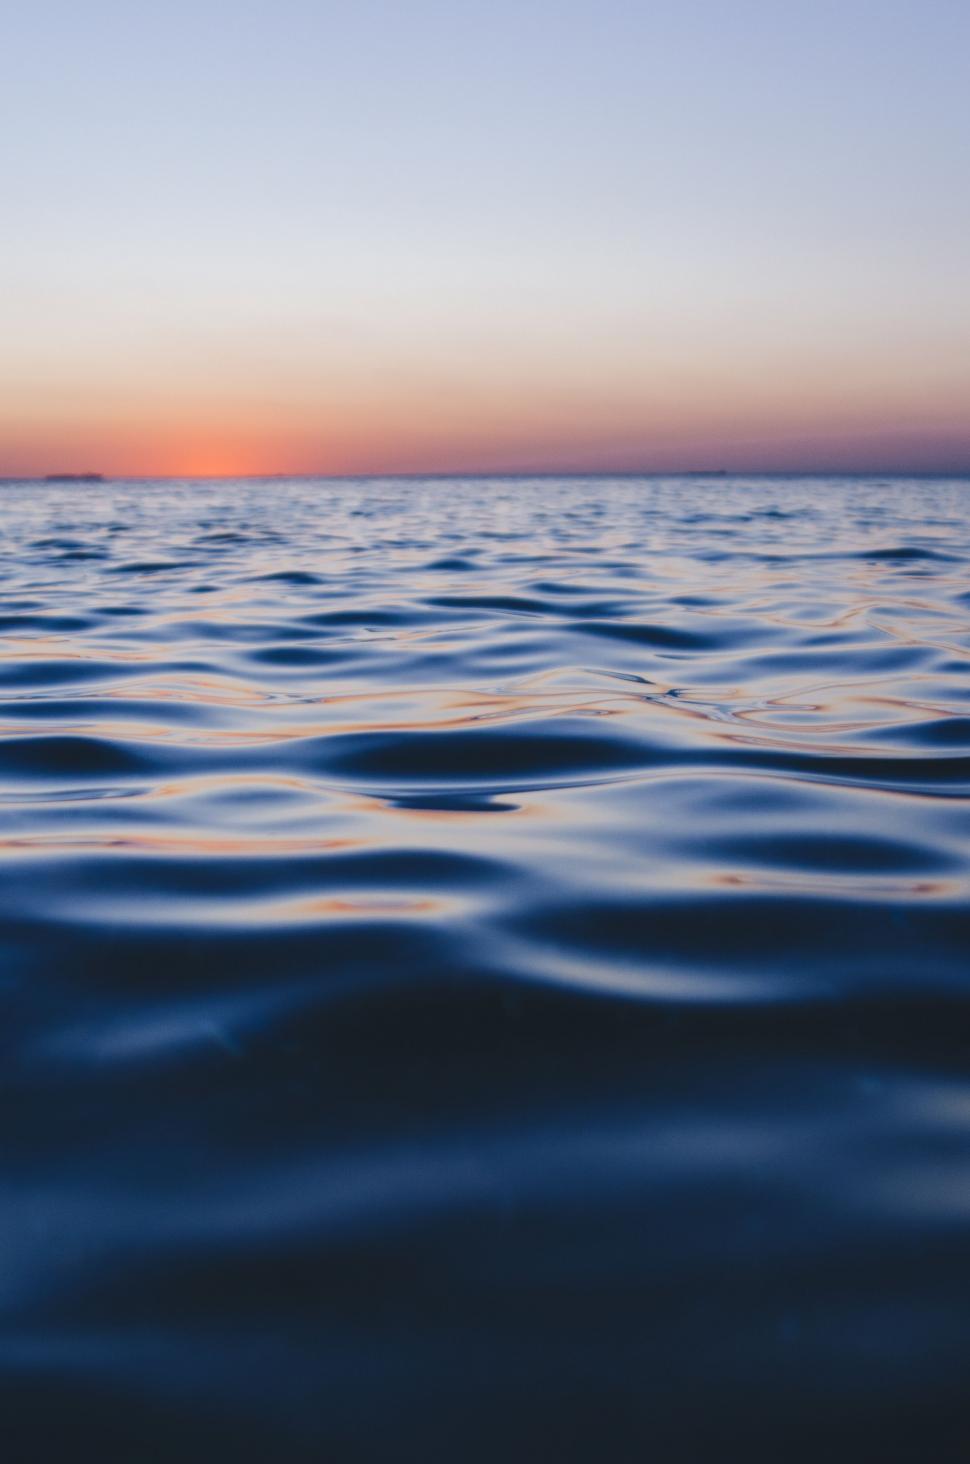 Free Image of Water Body at Sunset 